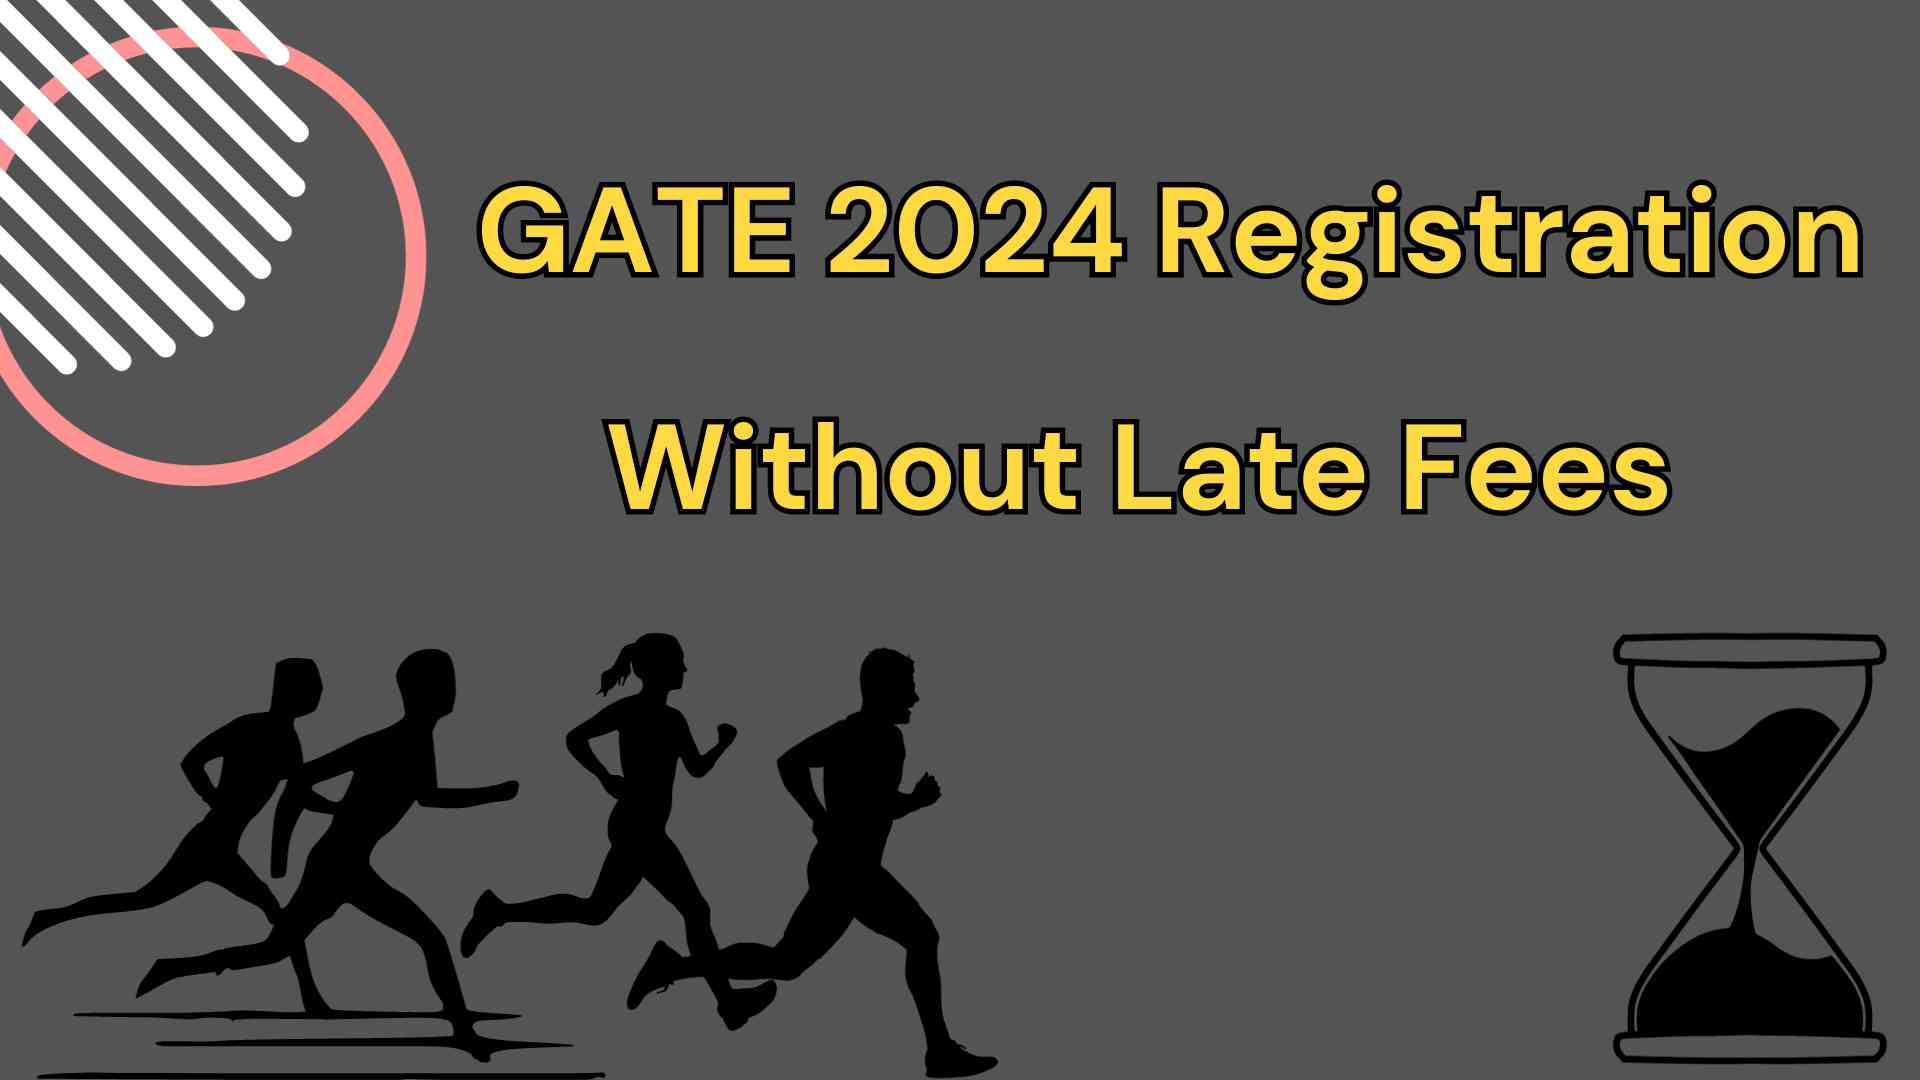 GATE 2024 Registration without Late Fees